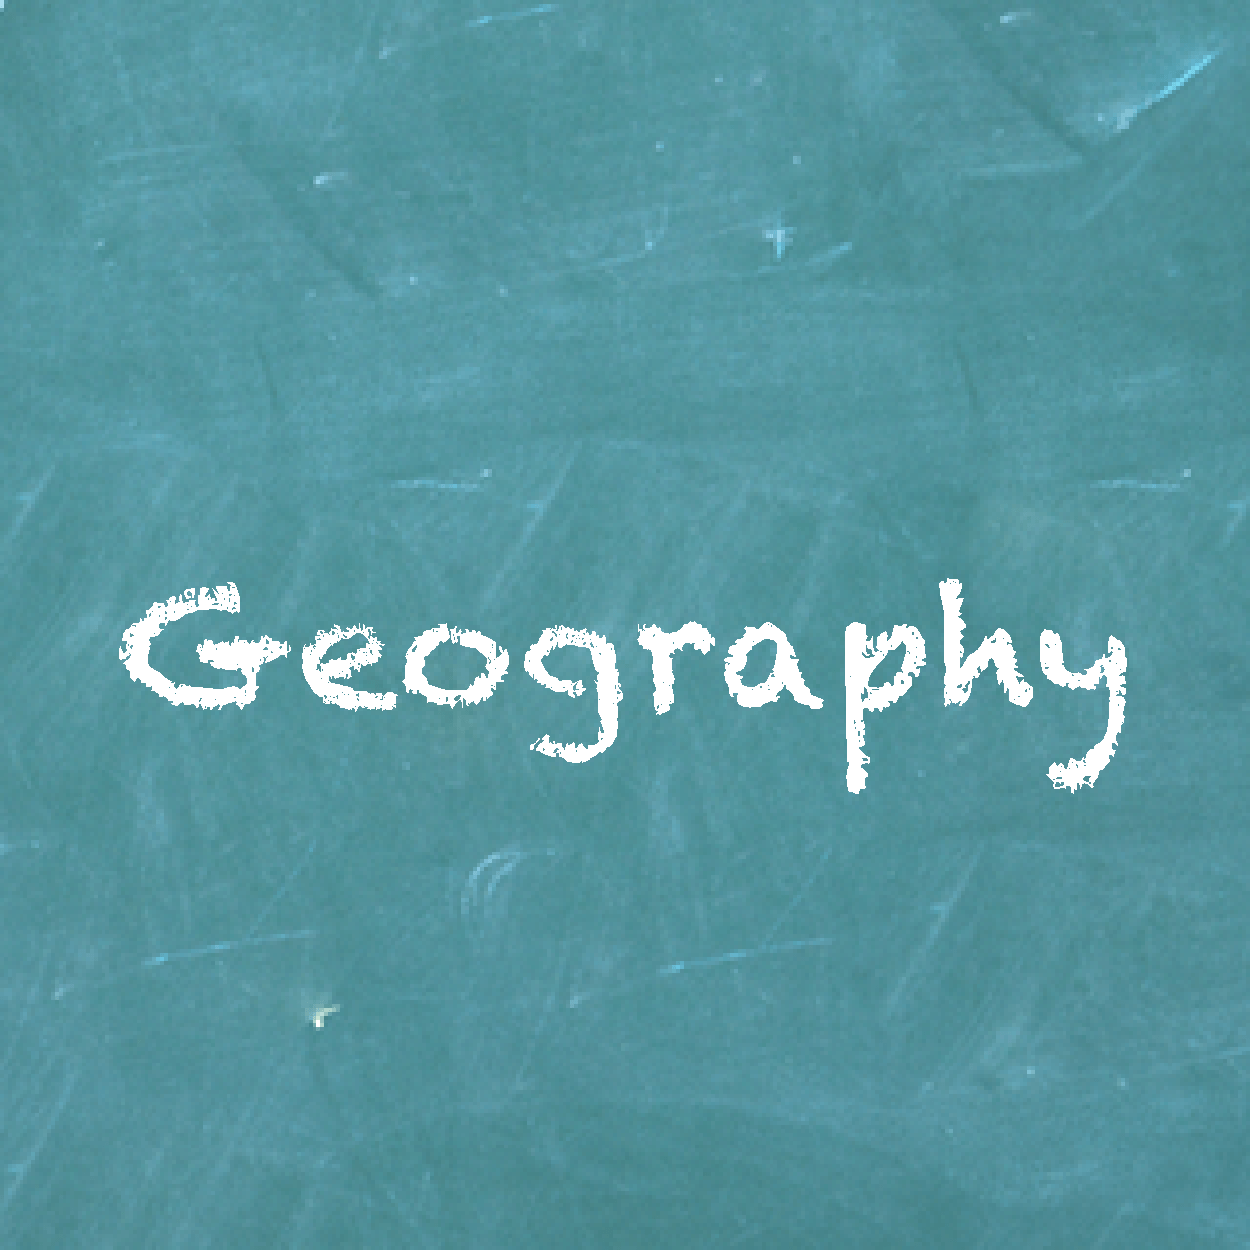 Geography past exam paper